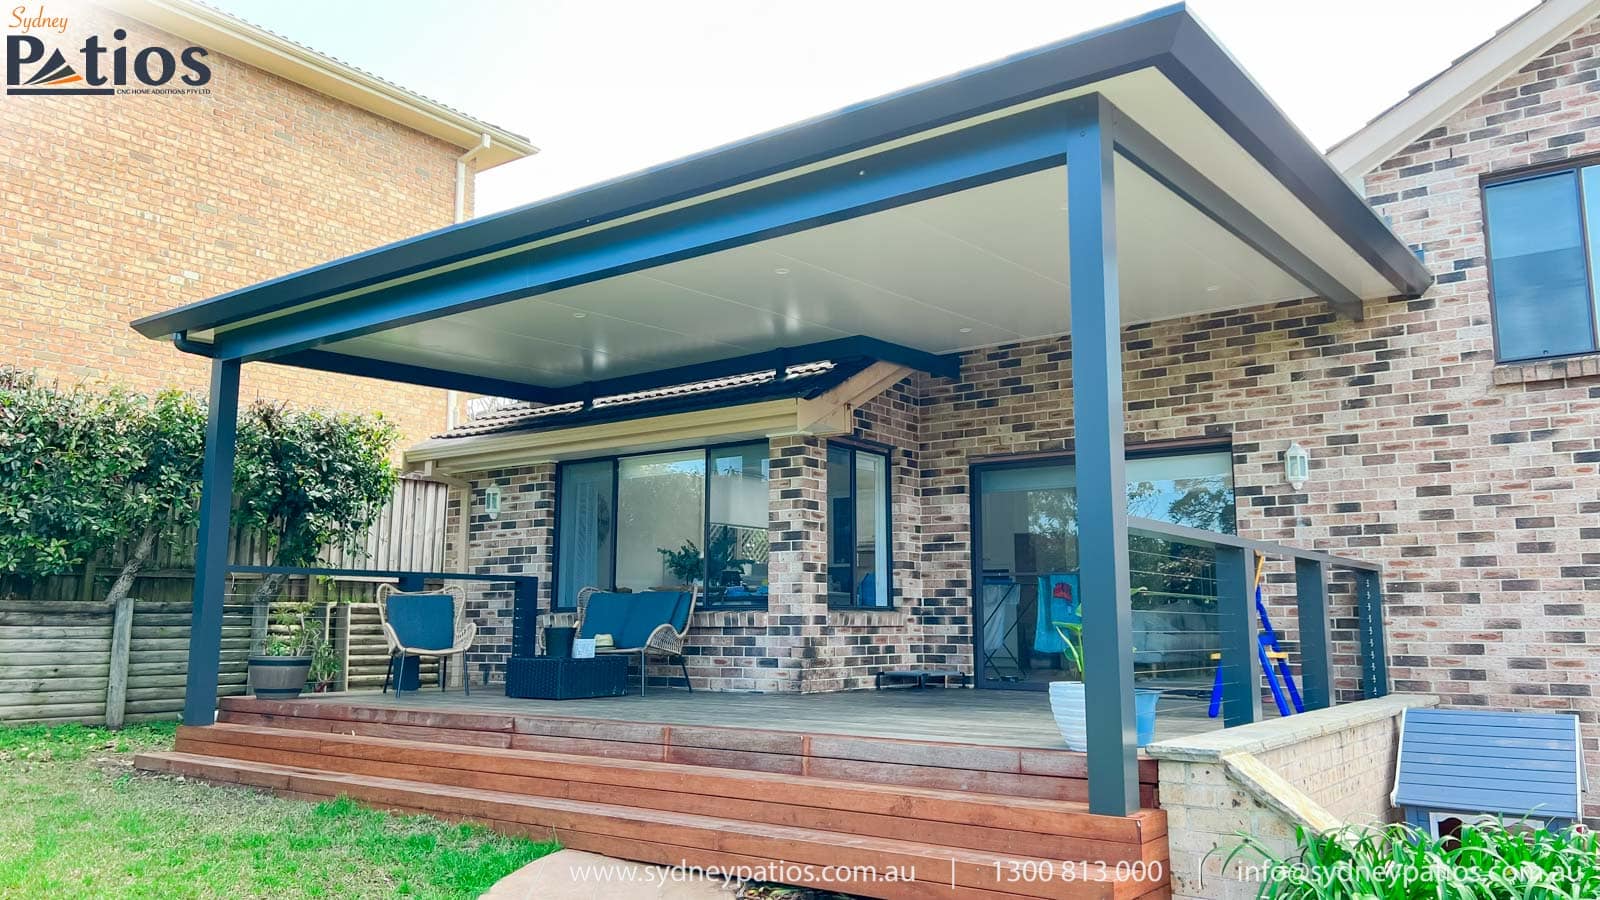 Castle Hill L-shaped Insulated Patio by Sydney Patios